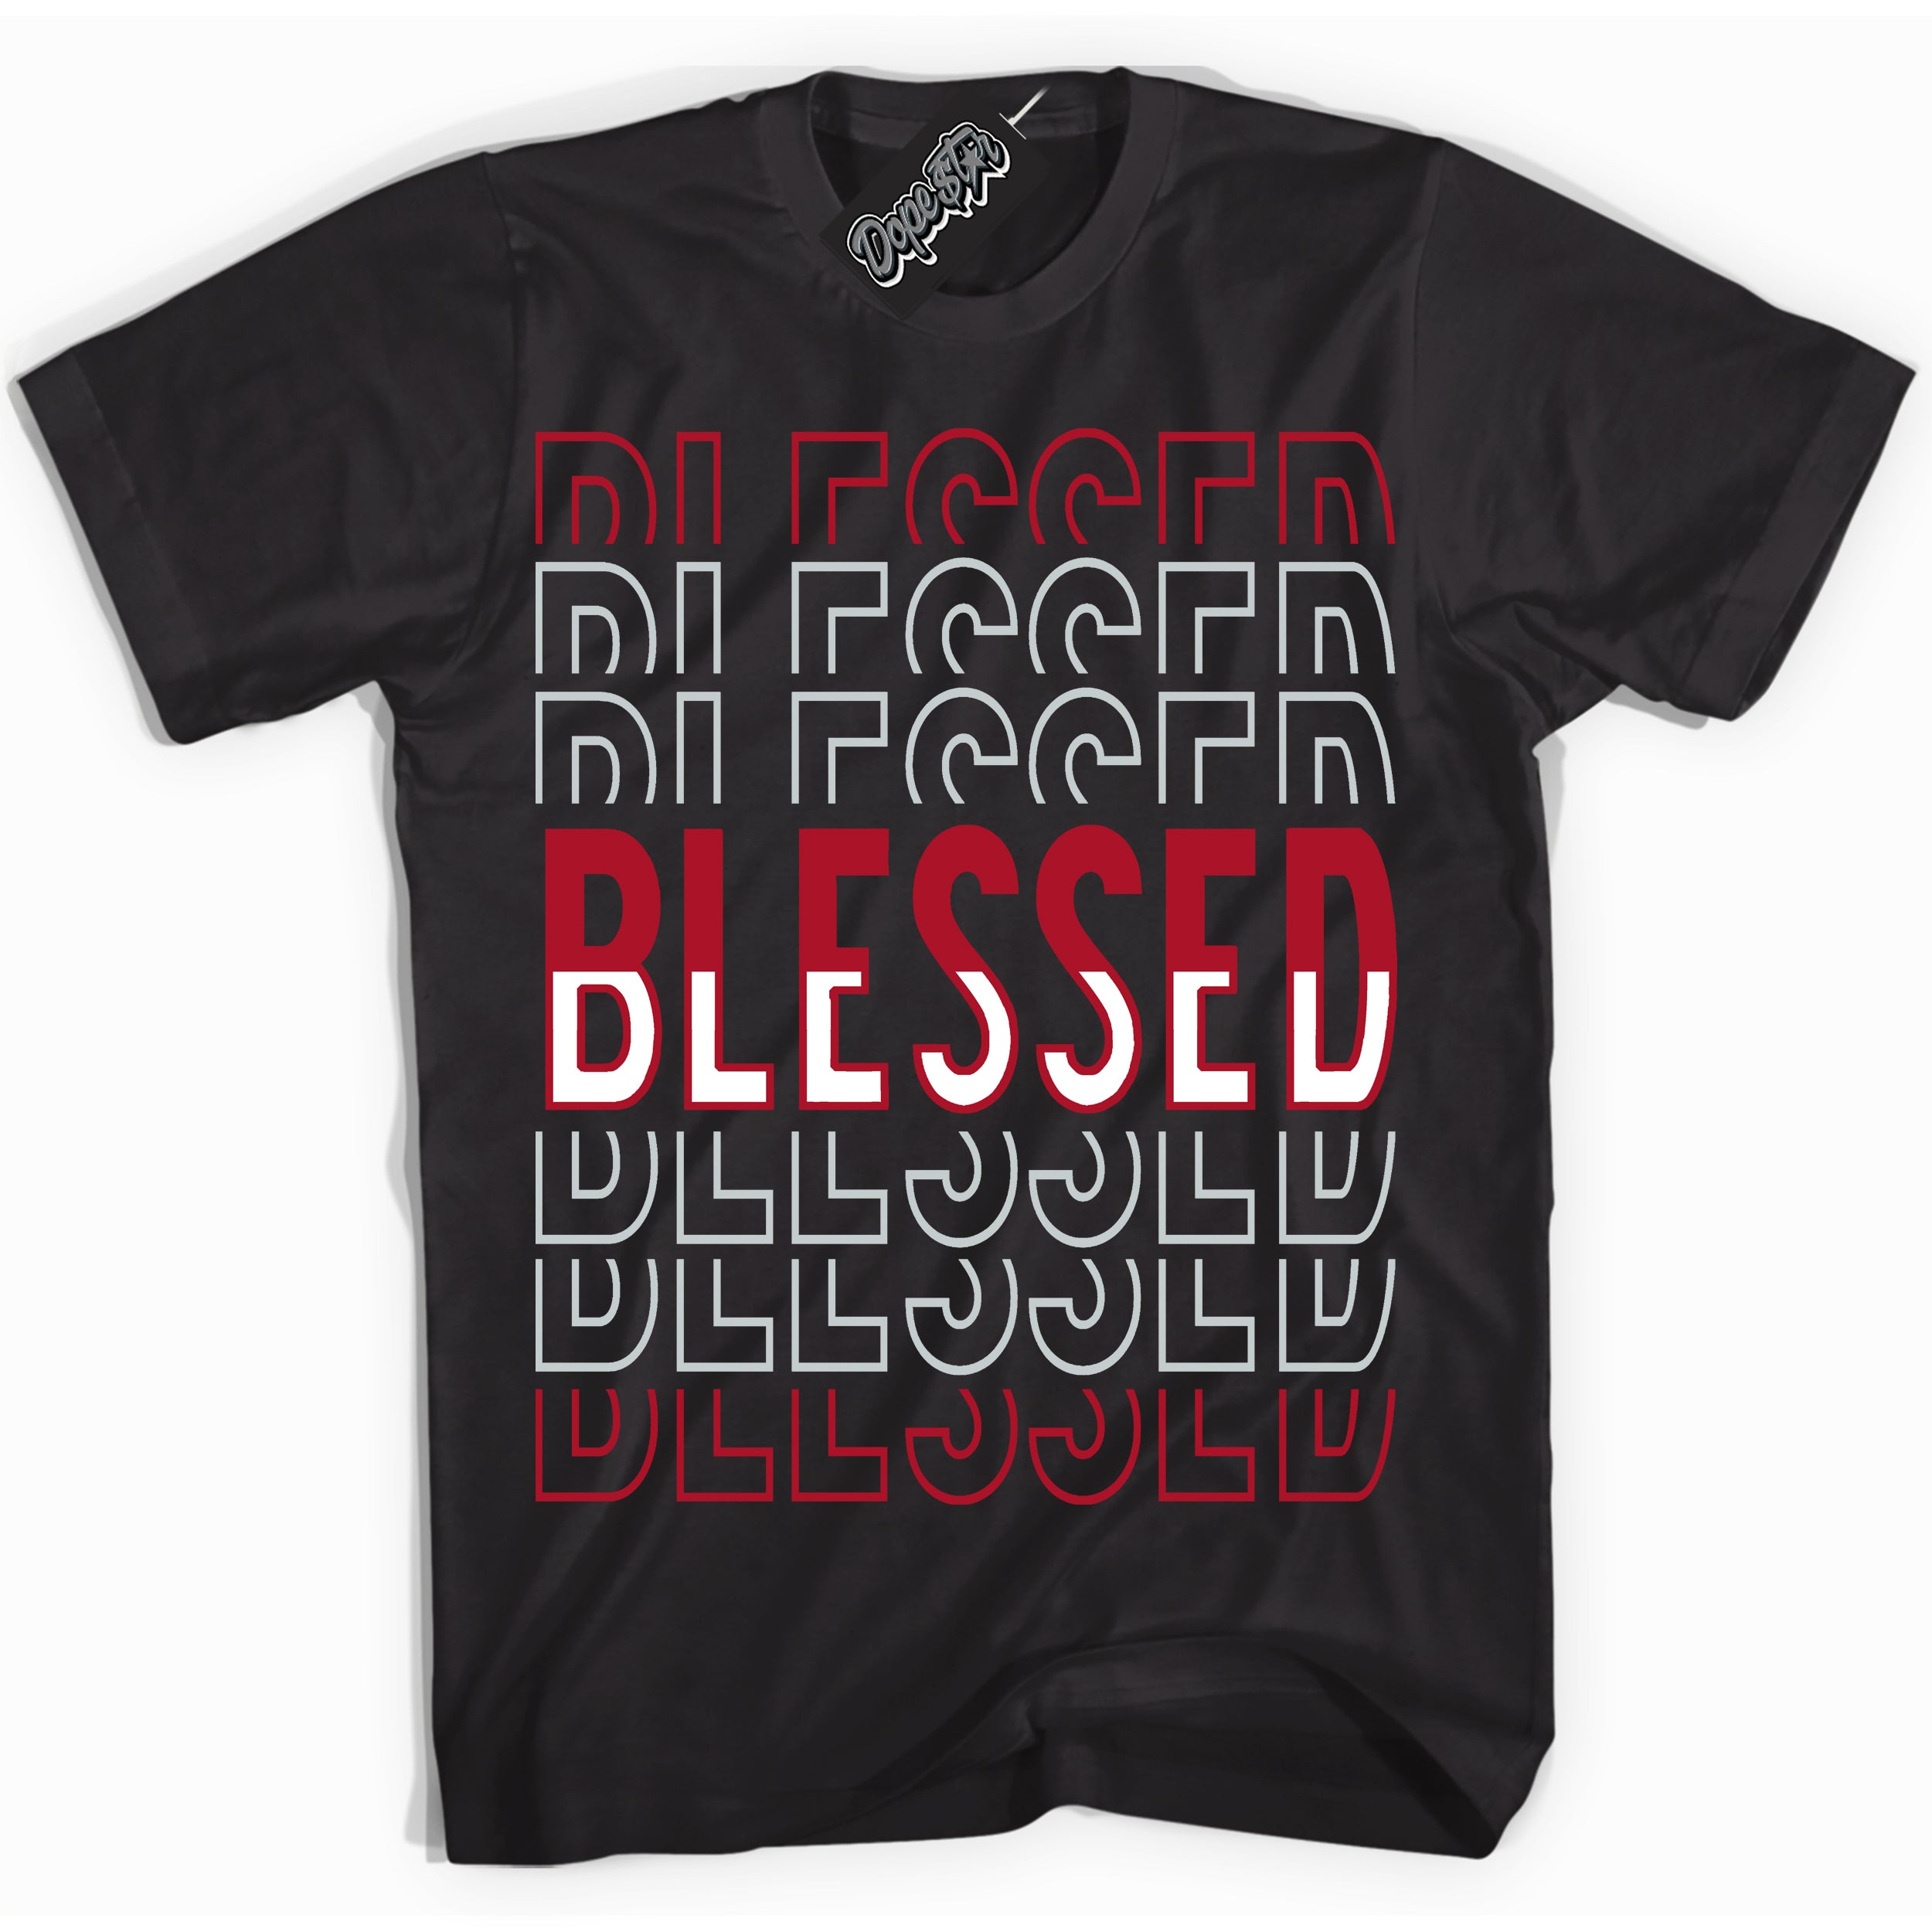 Cool Black Shirt with “ Blessed Stacked ” design that perfectly matches Reverse Ultraman Sneakers.